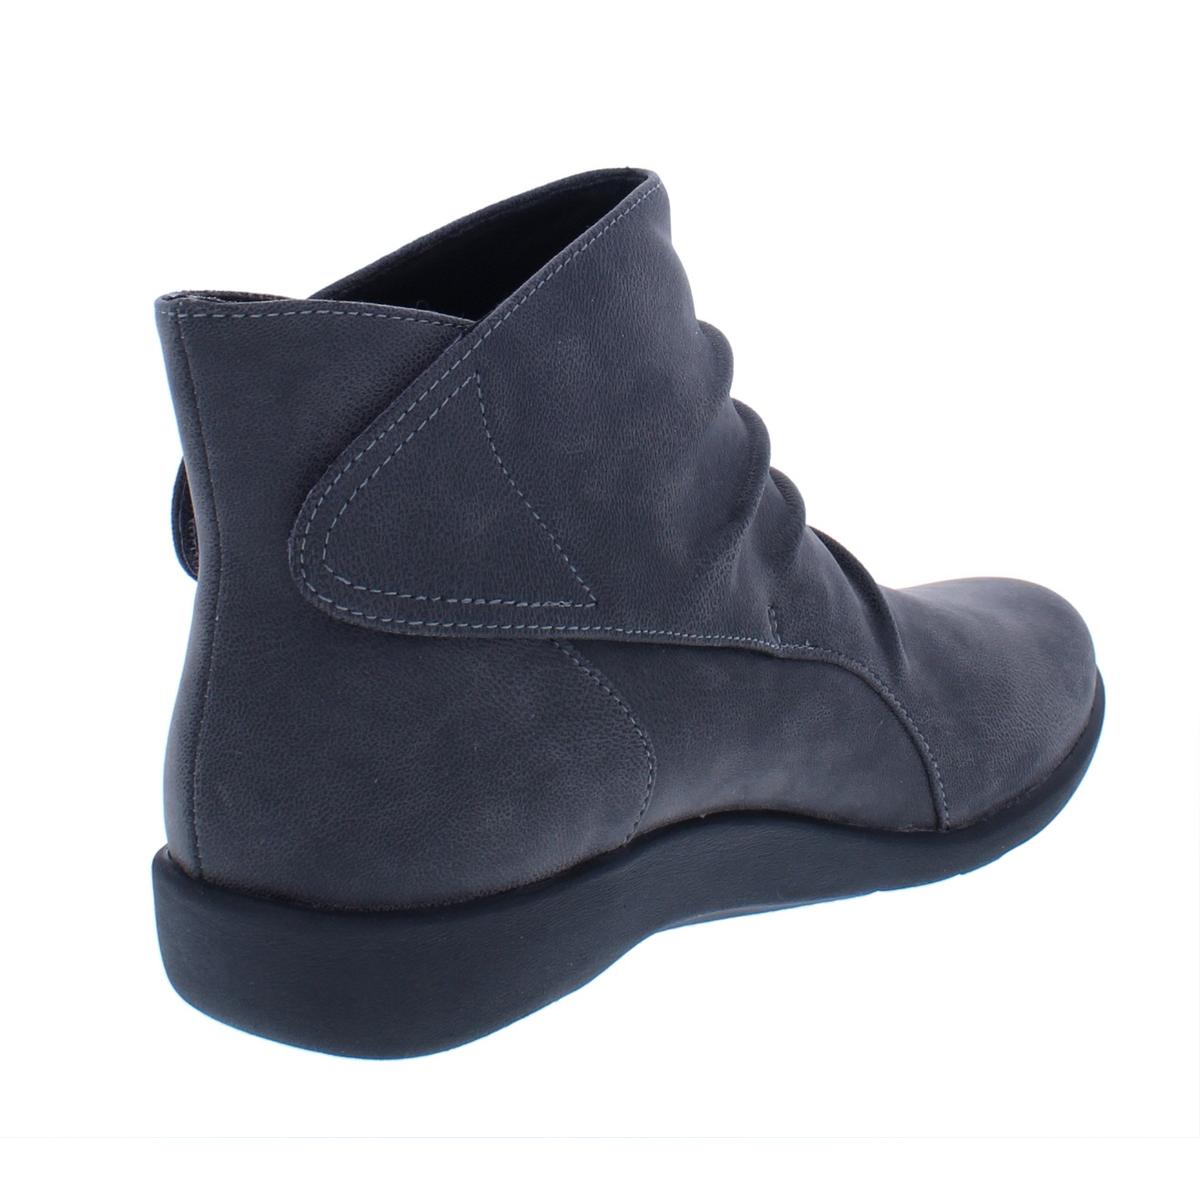 Clarks Womens Sillian Sway Gray Ankle Boots Shoes 9.5 Medium (B,M) BHFO ...